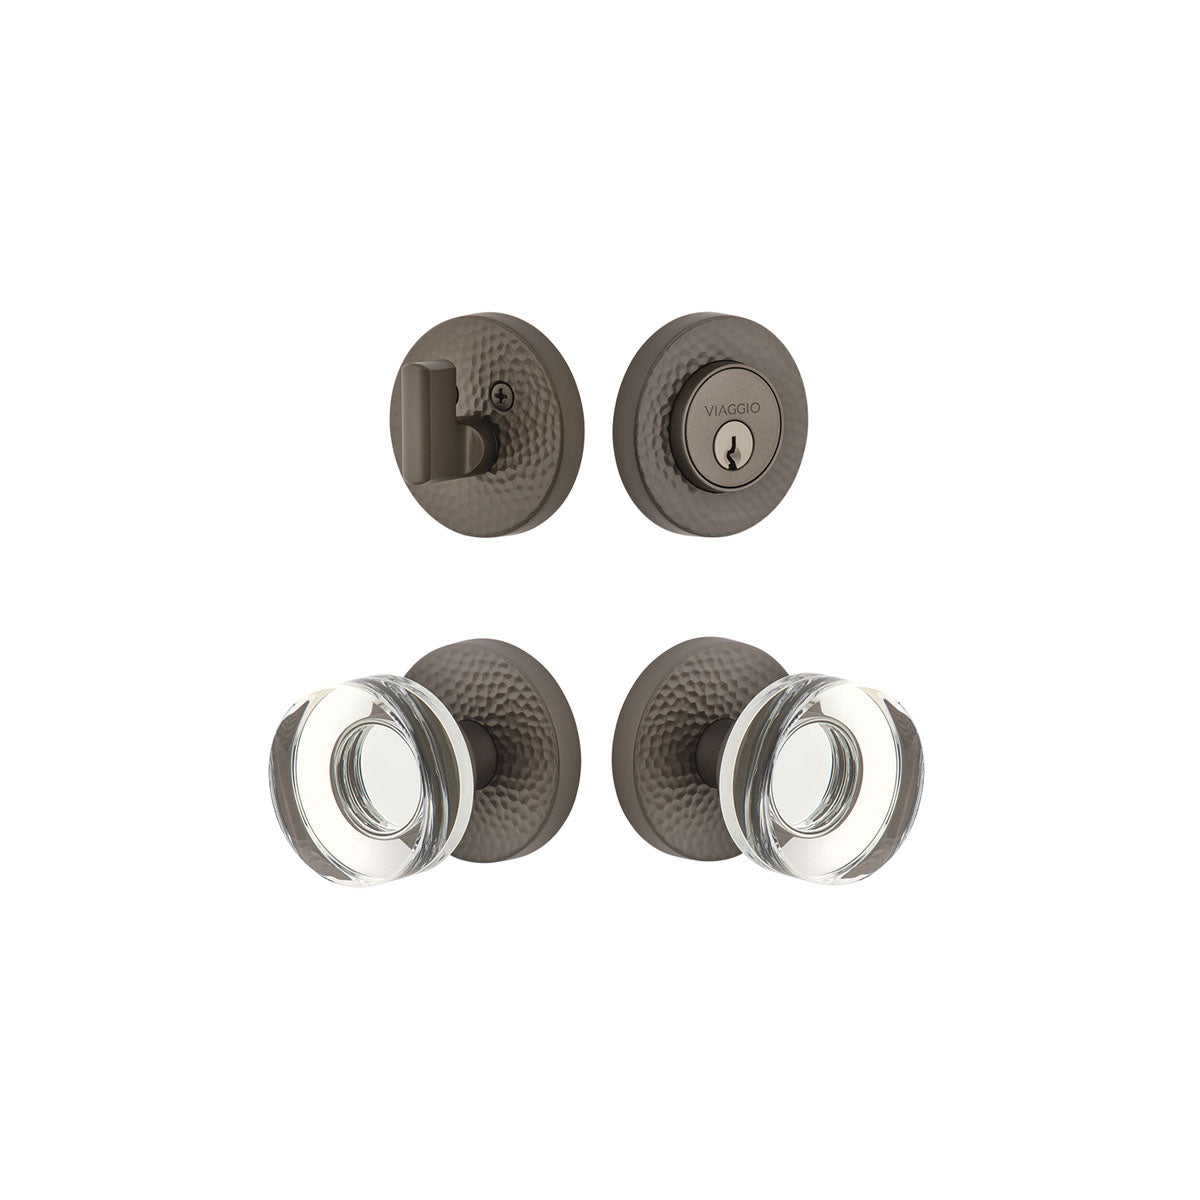 Circolo Hammered Rosette Entry Set with Circolo Crystal Knob in Titanium Gray